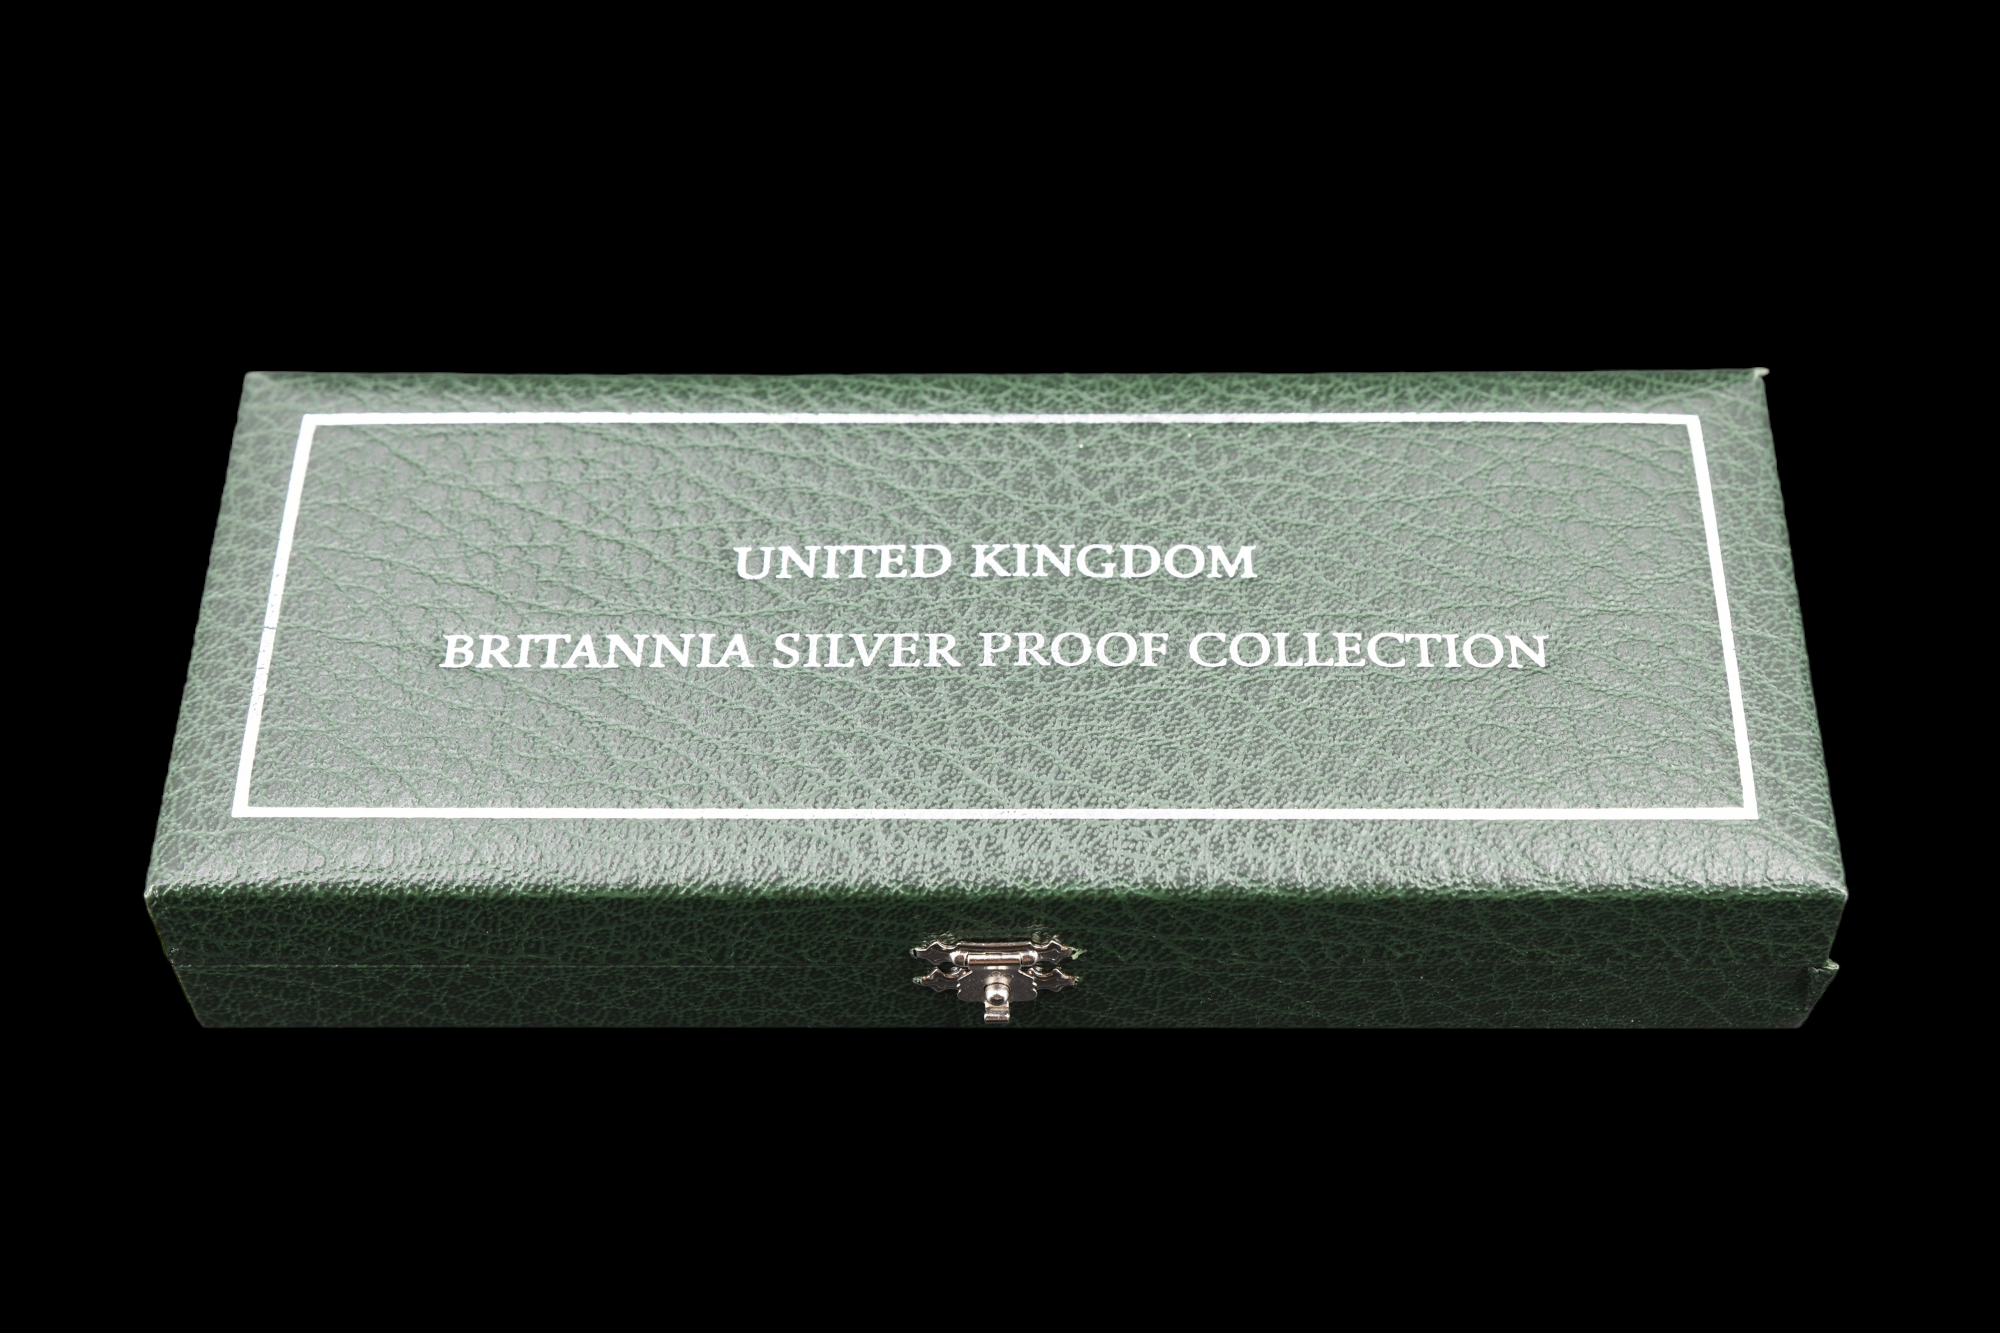 A cased silver proof 2003 Britannia Collection coin set by The Royal Mint with certificate - Image 4 of 4